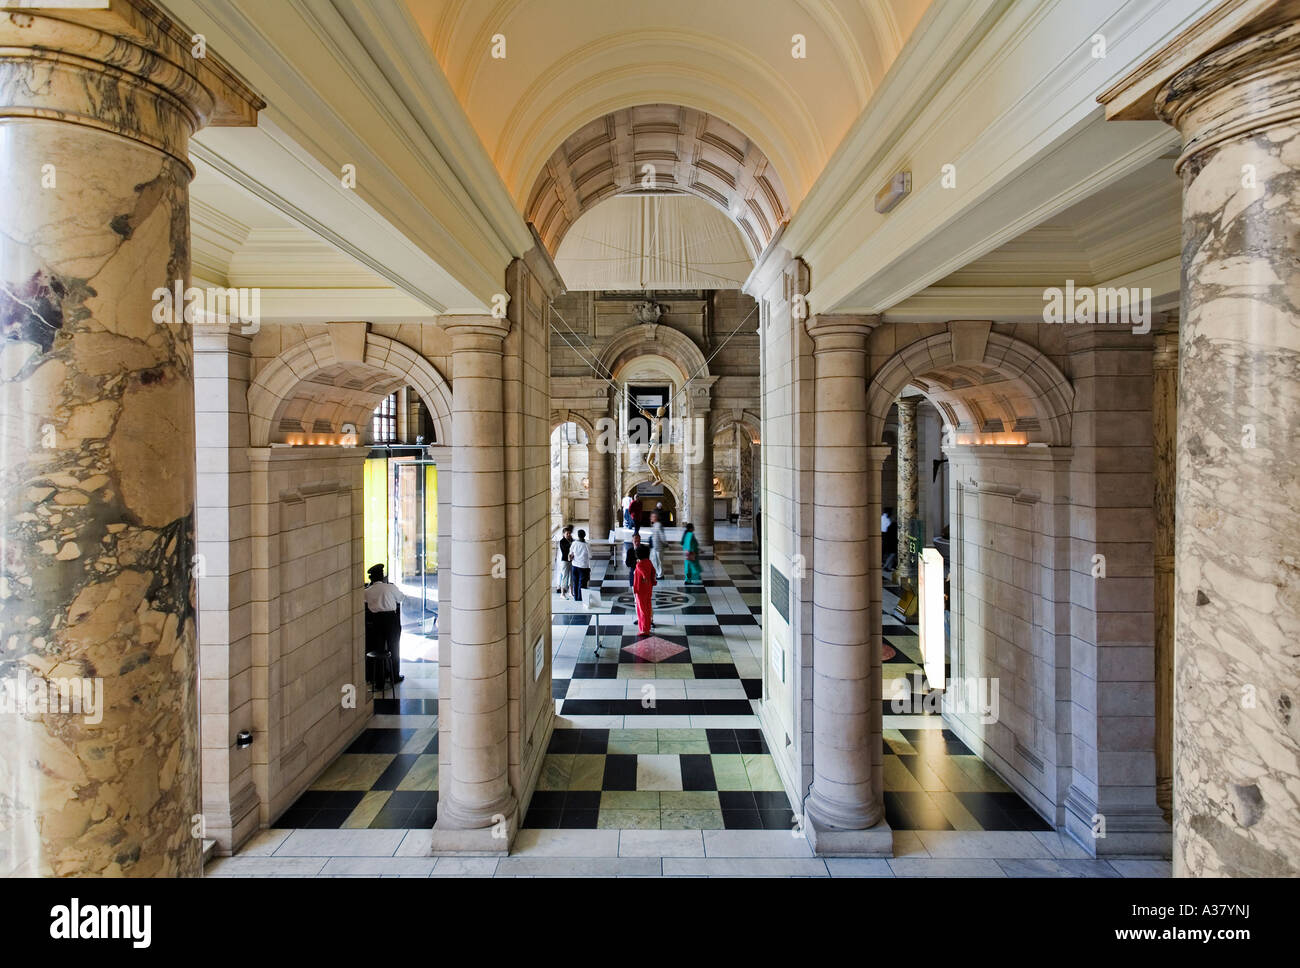 Eingangshalle des Victoria and Albert Museum in South Kensington, London Stockfoto